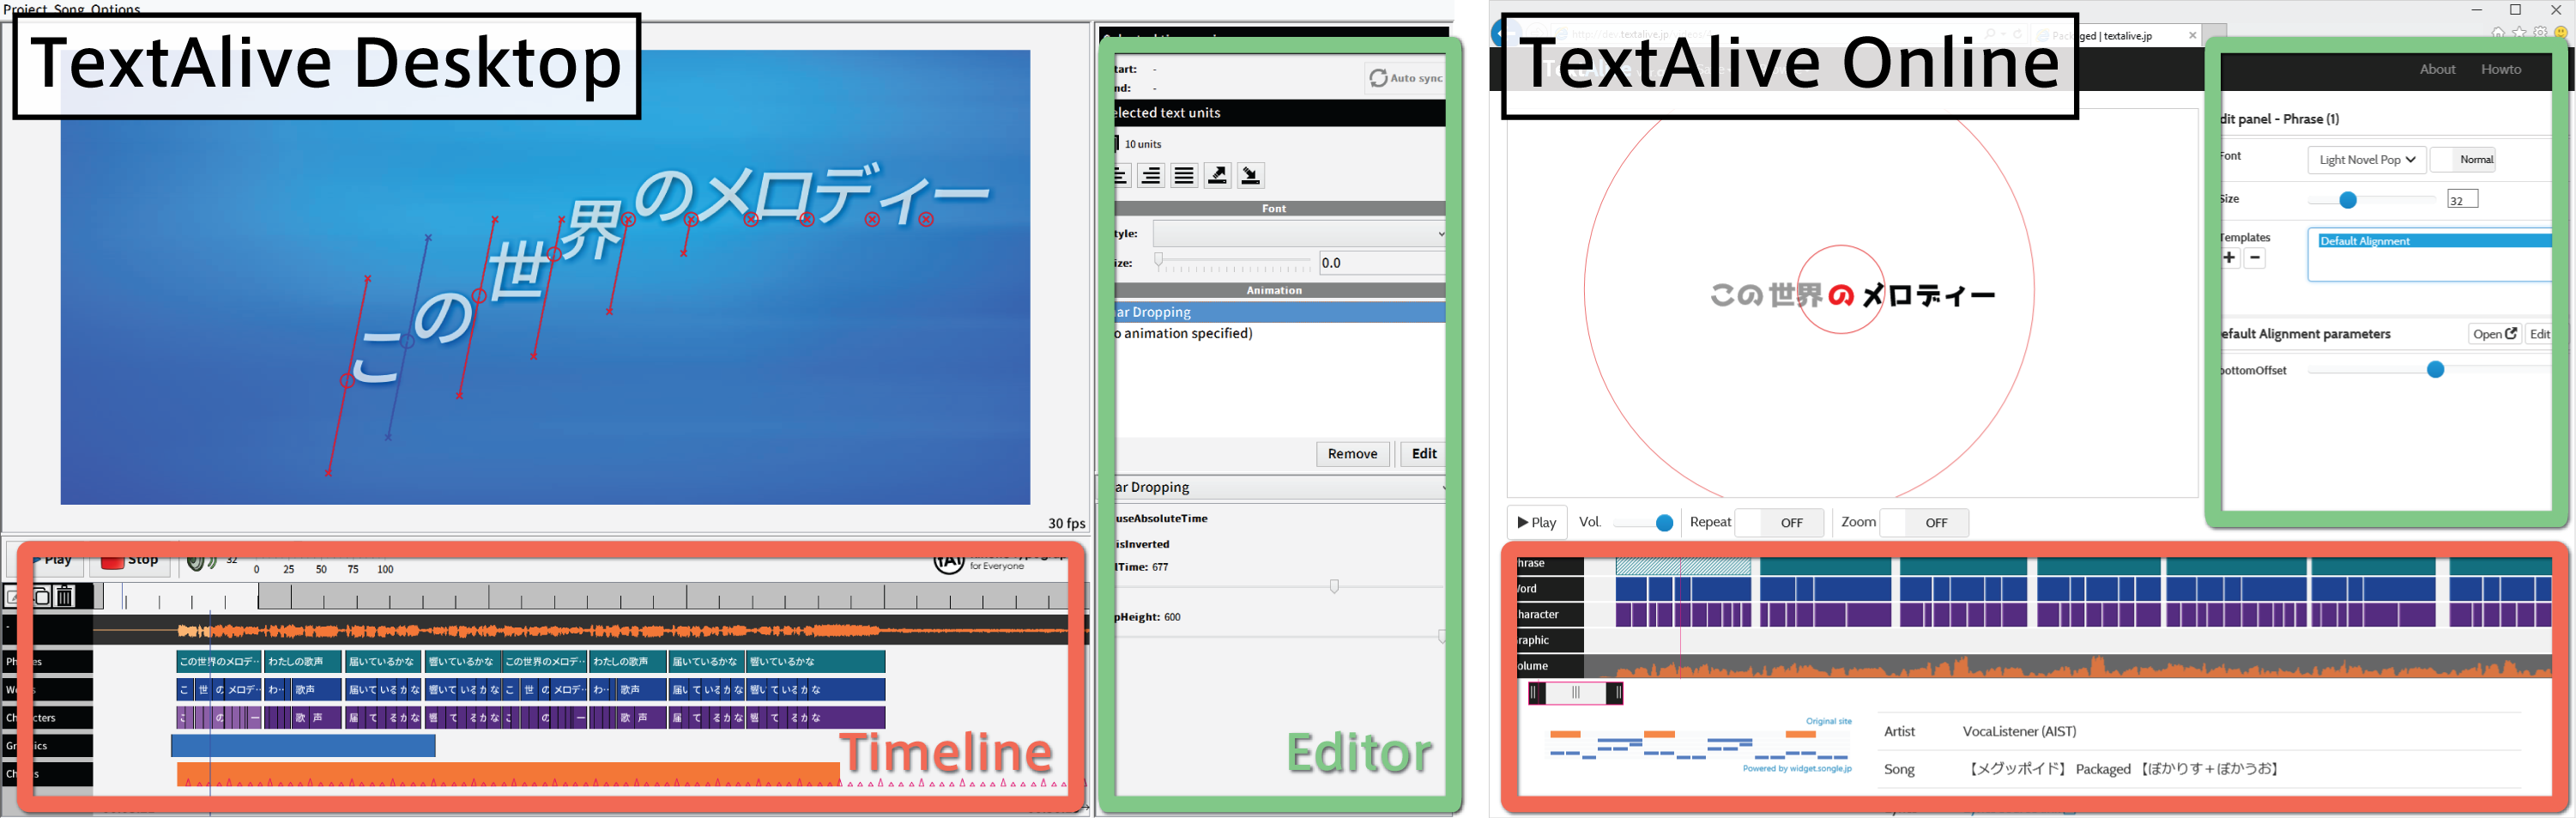 TextAlive Desktop and TextAlive Online are both live programming environments for creating Kinetic Typography videos that share most of their GUIs. TextAlive Online enables a more collaborative way of content authoring, requires a server-side backend, and raises interesting research questions.